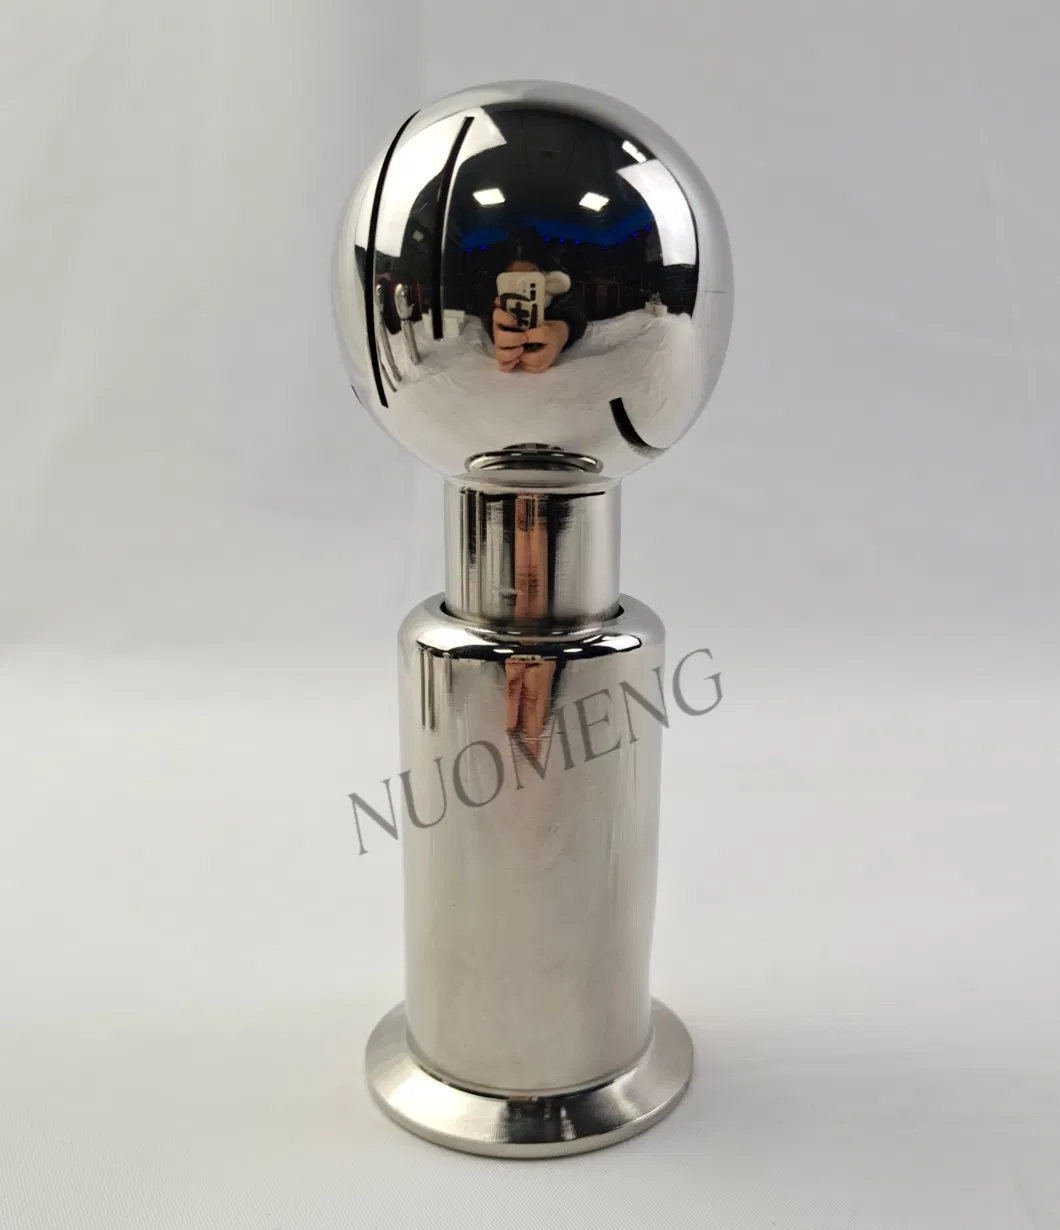 Sanitary Stainless Steel Threaded Fixed Cleaning Ball Nm120303